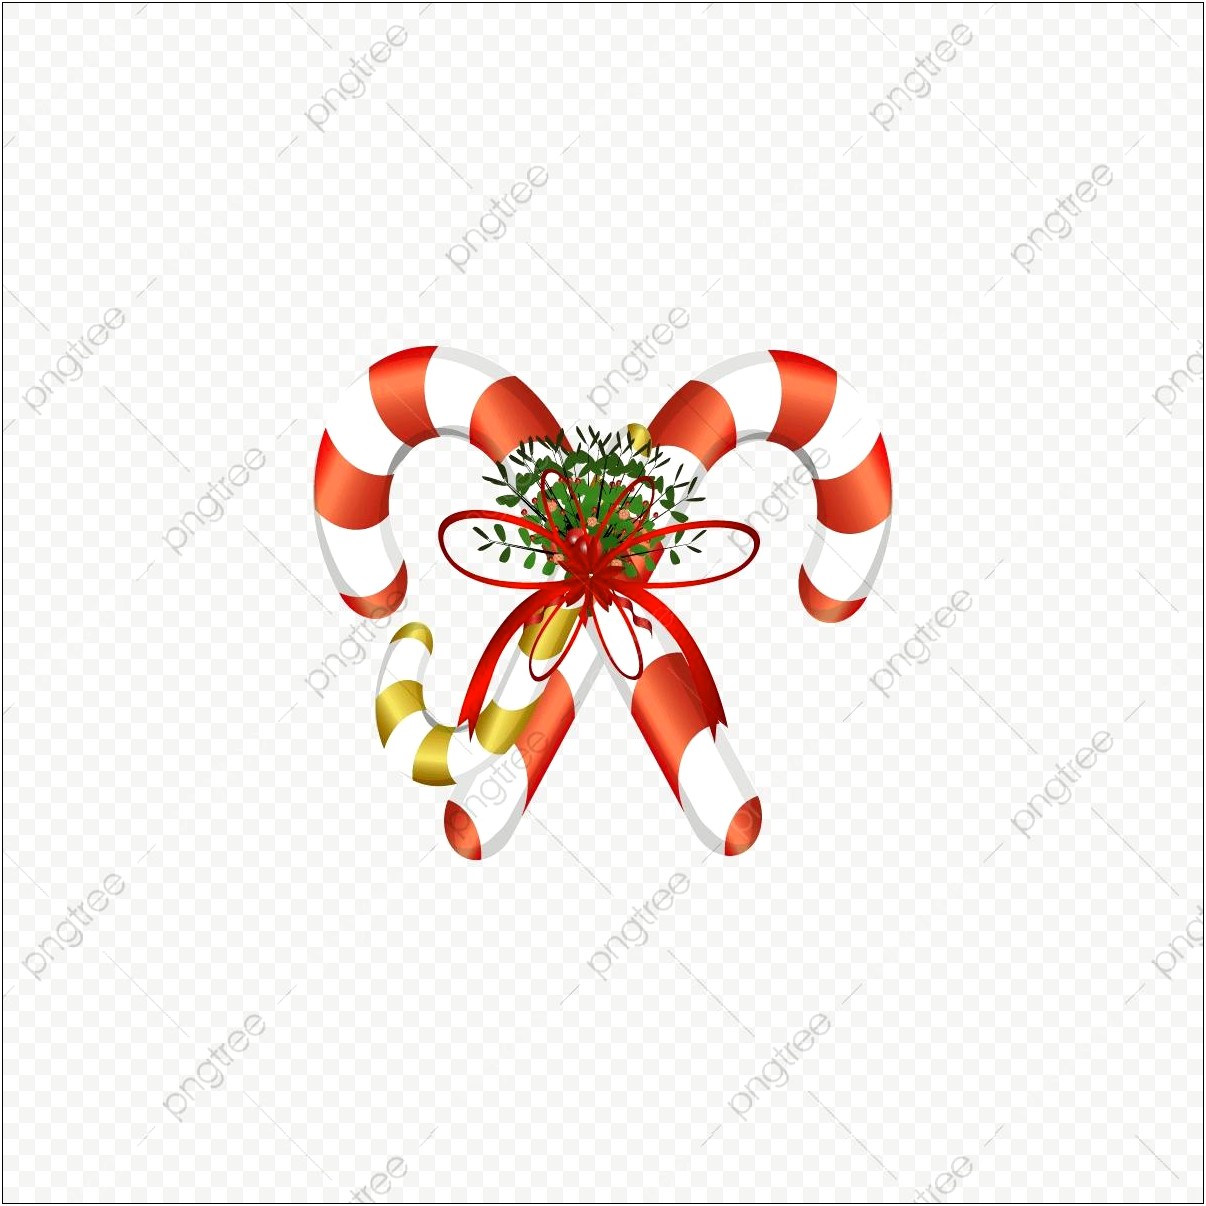 Free Christmas Candy Cane Ornament Templates